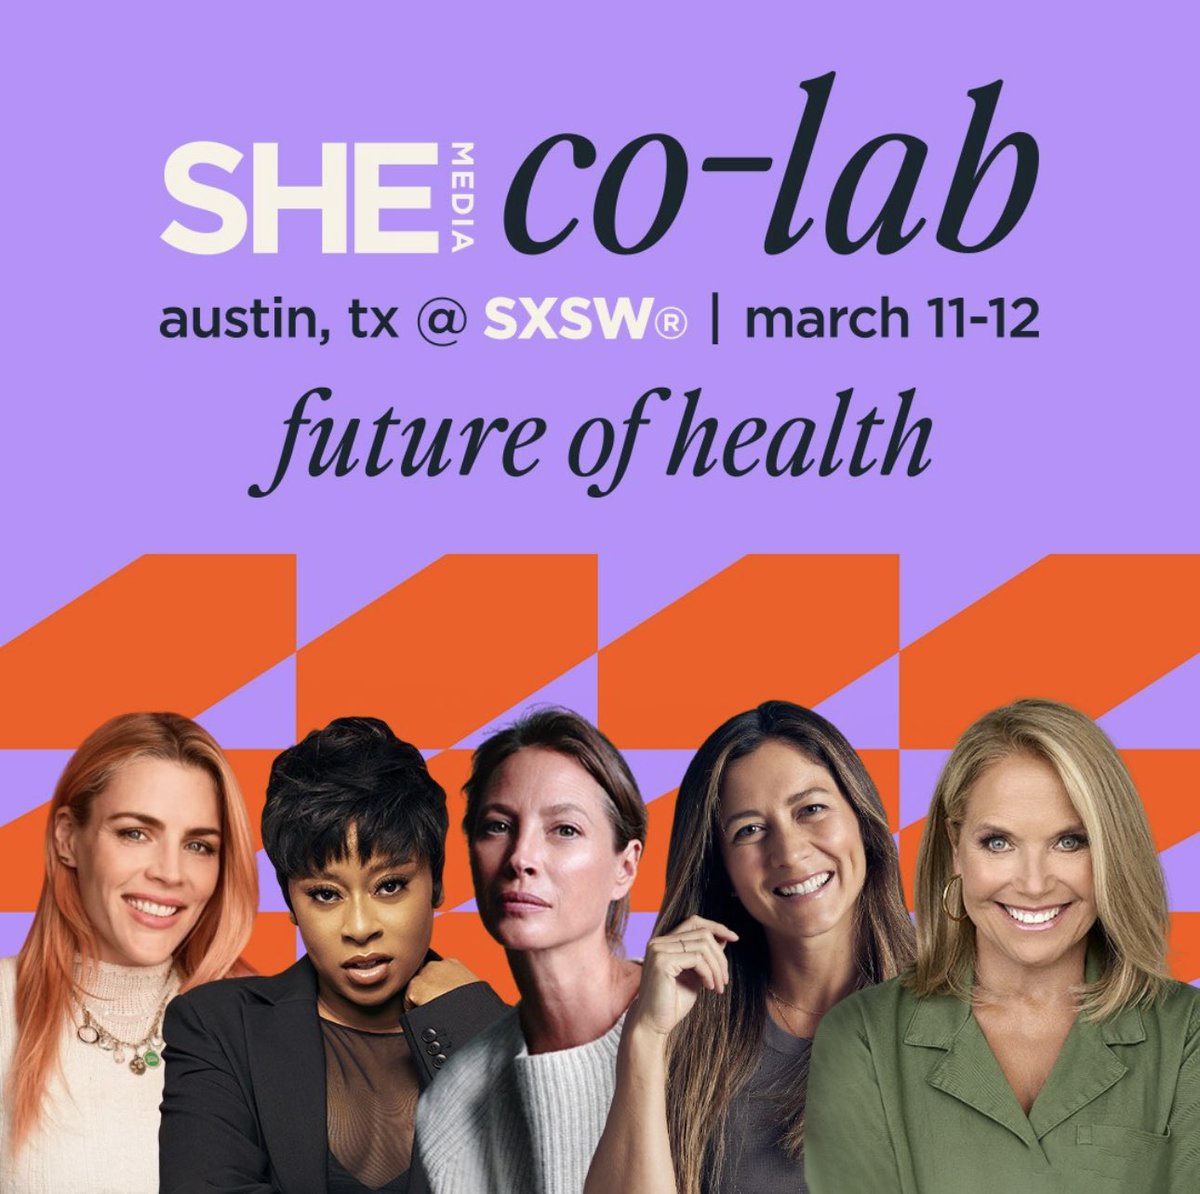 SHE Media Co-Lab at SXSW, March 11-12 from 10am-5pm at Native Hostel.

RSVP (password is “shemedia”): eventbrite.com/e/she-media-co…

Speakers = Katie Couric, Busy Philipps, Phoebe Robinson, Christy Turlington and Emma Lovewell. We’d *imagine* this is a free drinks situation. More soon!